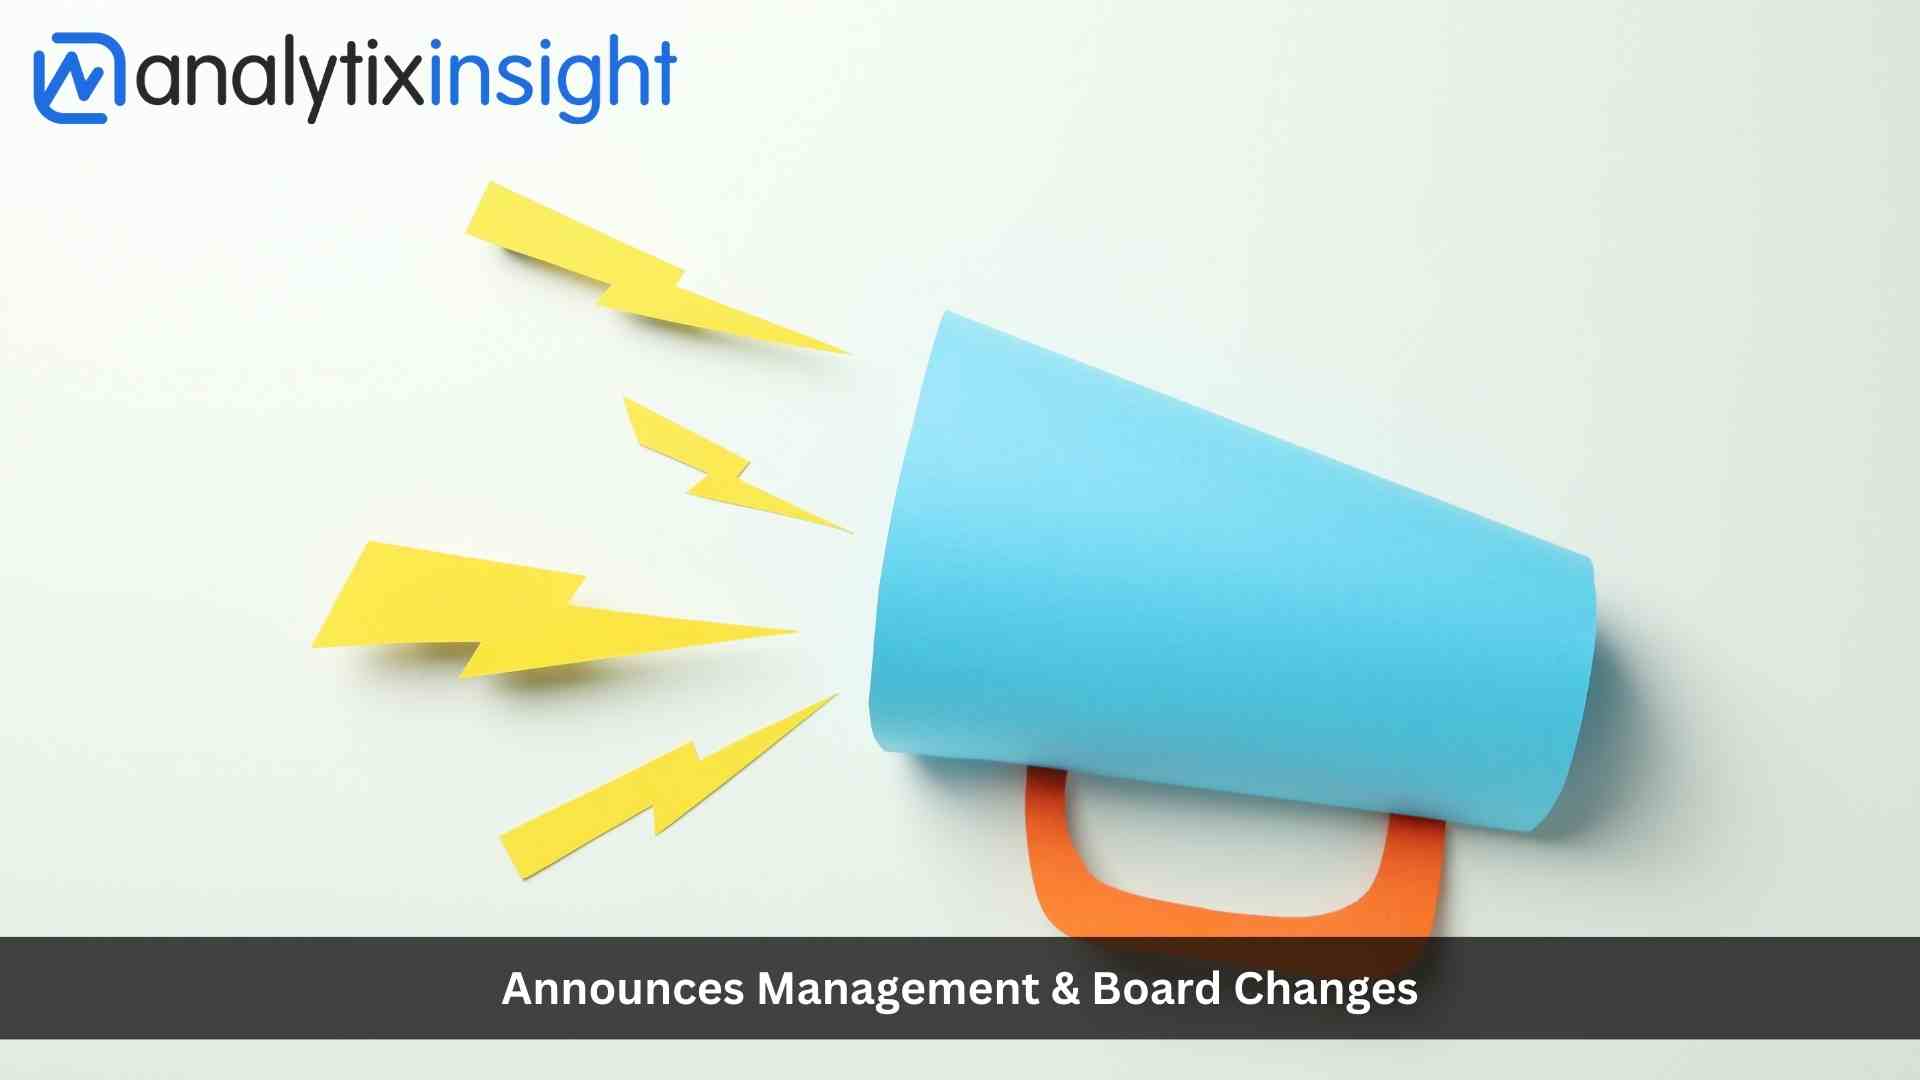 AnalytixInsight Announces Management & Board Changes